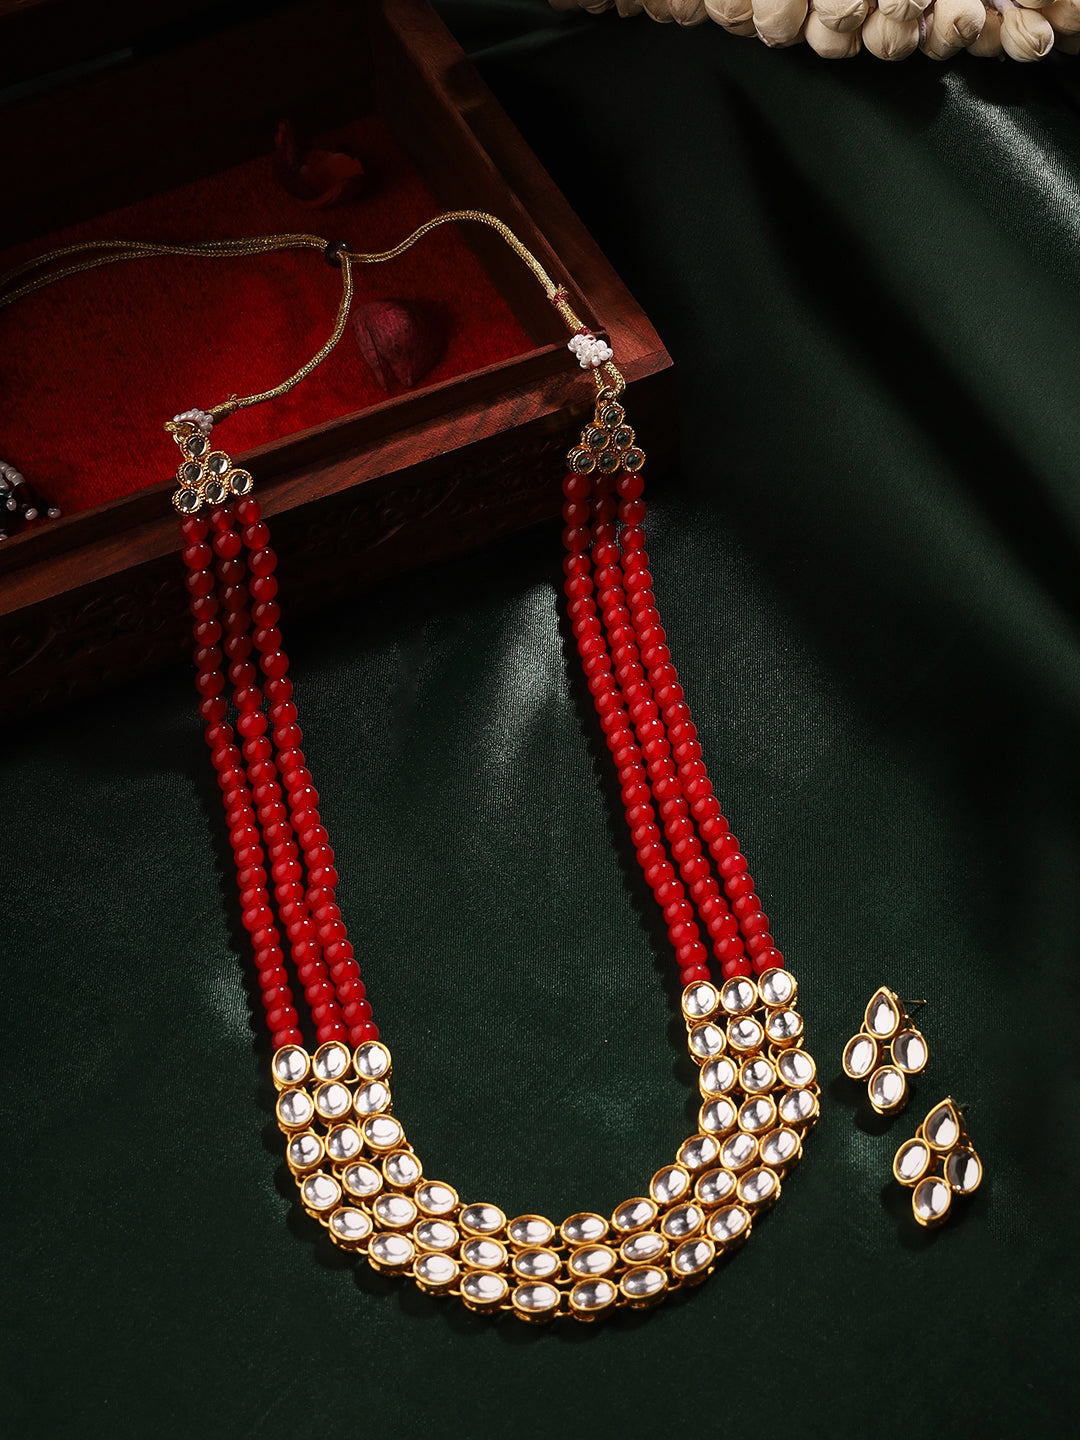 Priyaasi A Kundan Jewellery Set Adorned with Rubies and Exquisite Earrings